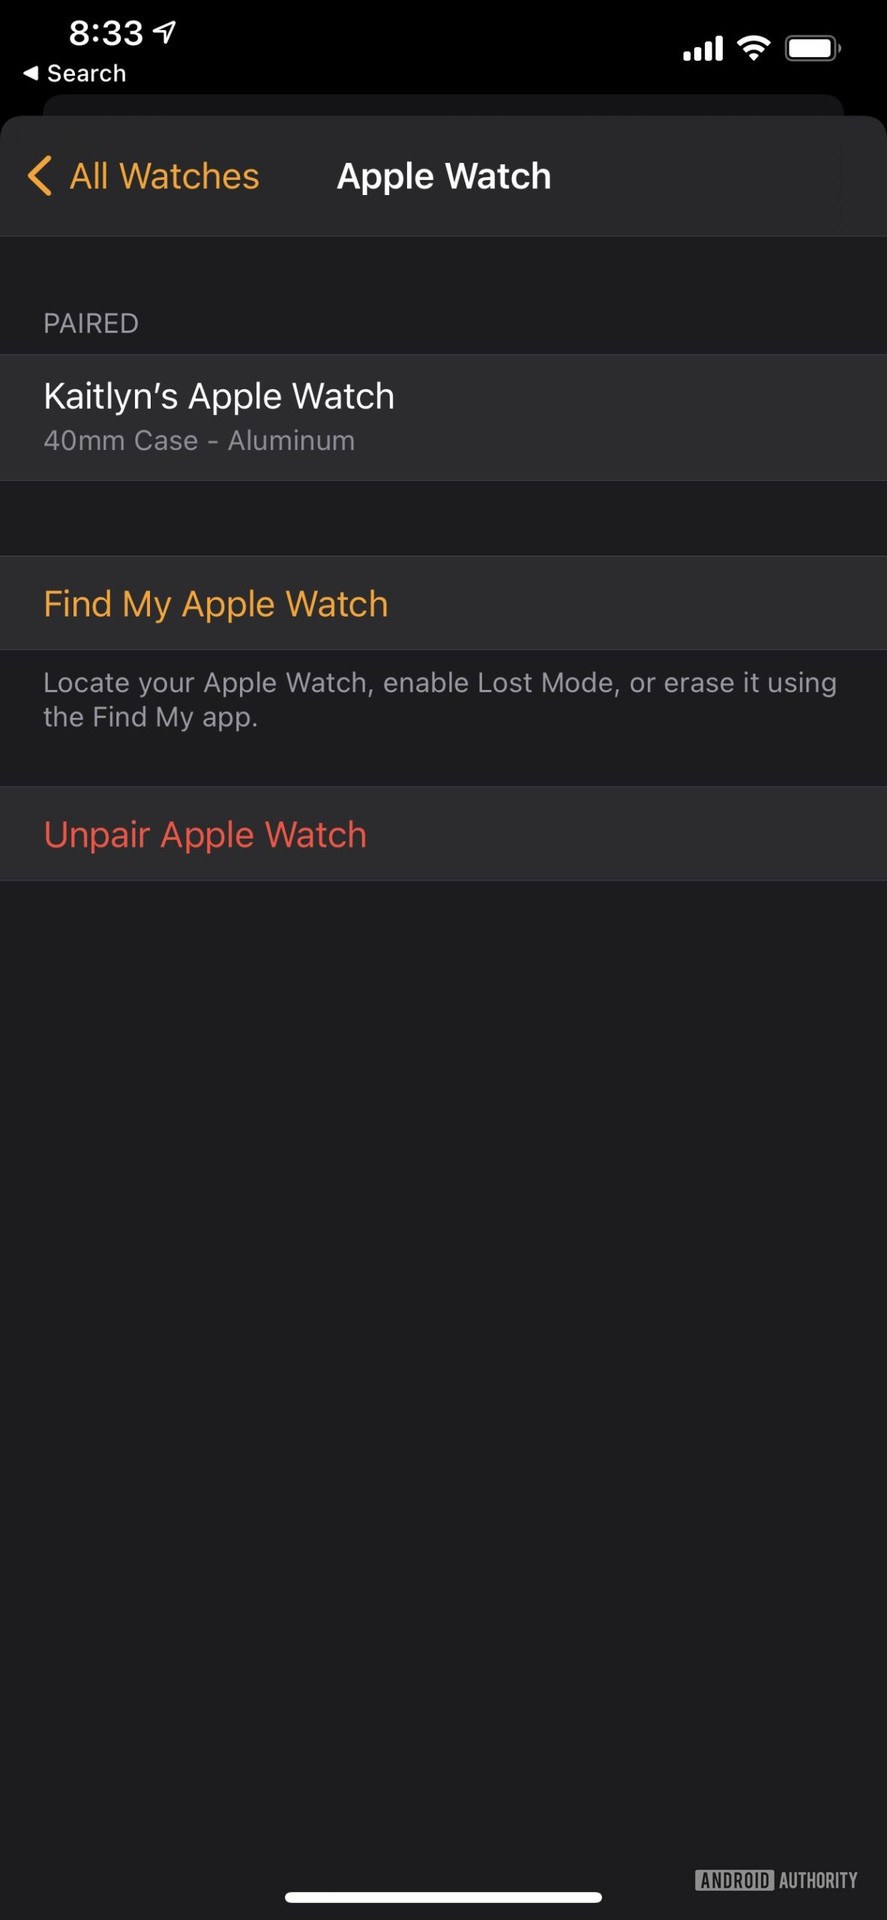 iPhone screenshot displays where to find Unpair Apple Watch on the Watch app